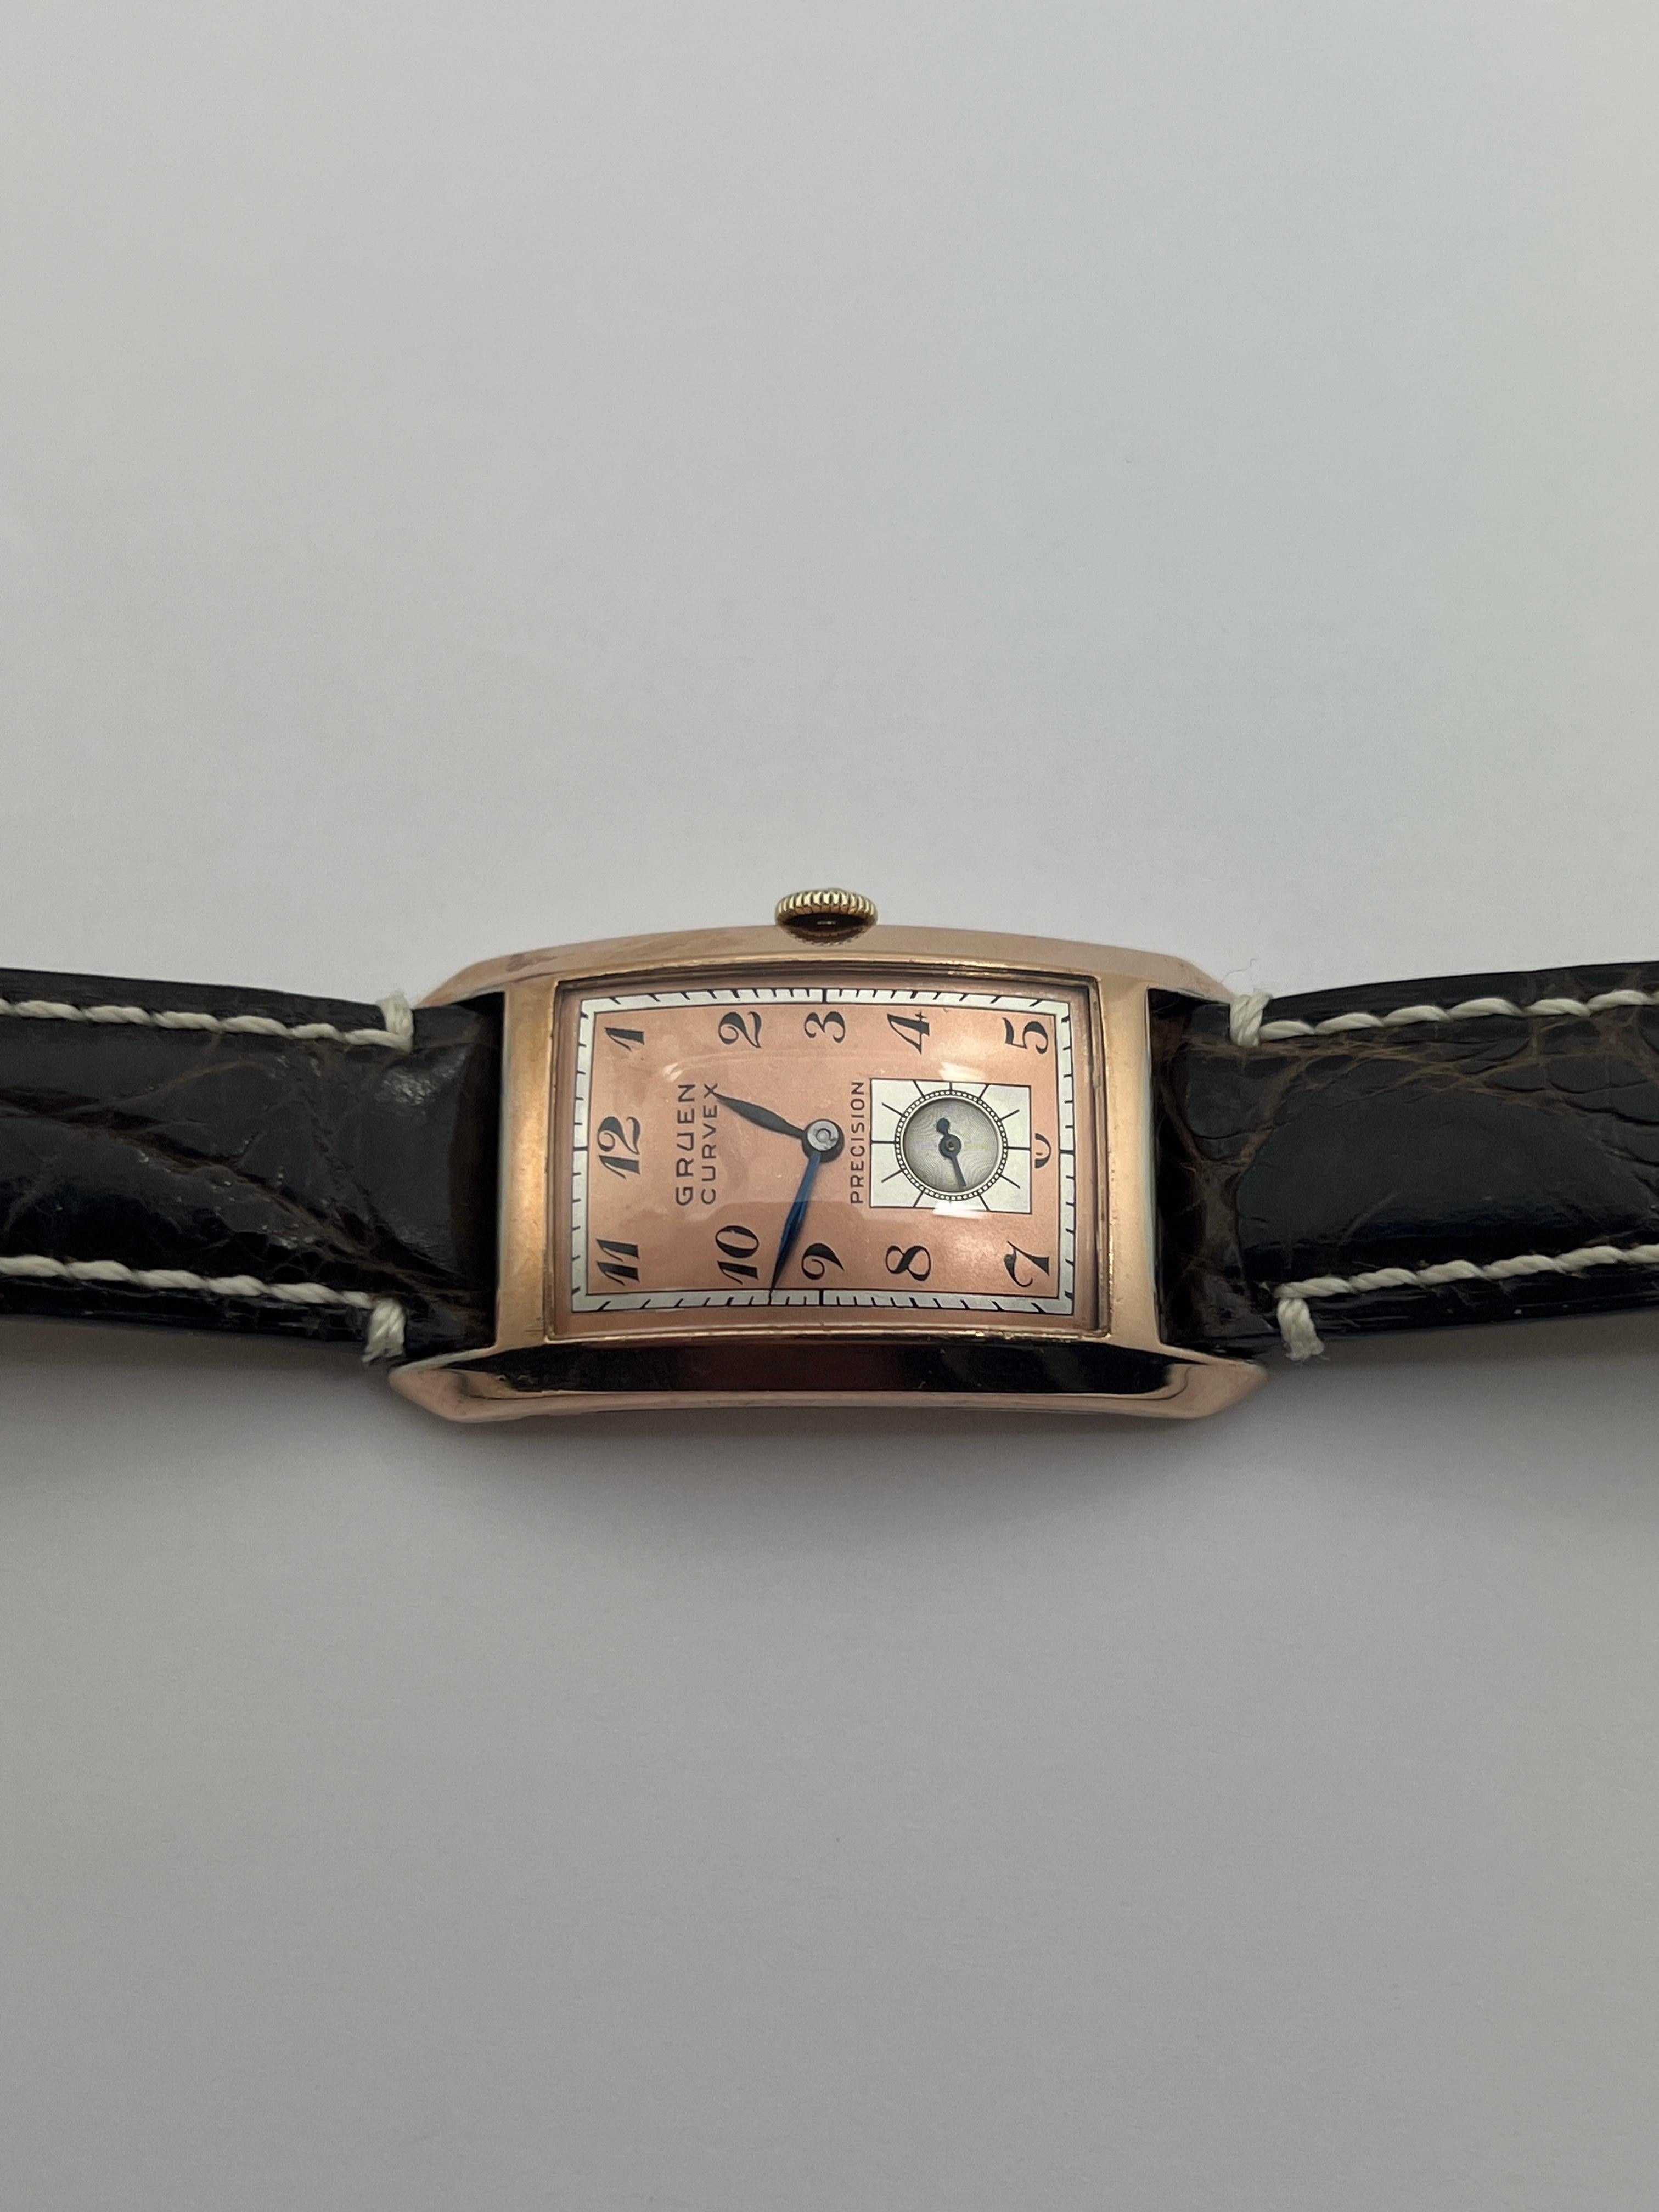 I have another treasure for your consideration. It is one of the first Gruen Curvex models introduced in the mid 1930’s. Let me introduce you ti the Gruen Curvex, look at the sublime curvature that hugs the wrist. 

Technical Note:  Notes
Gruen